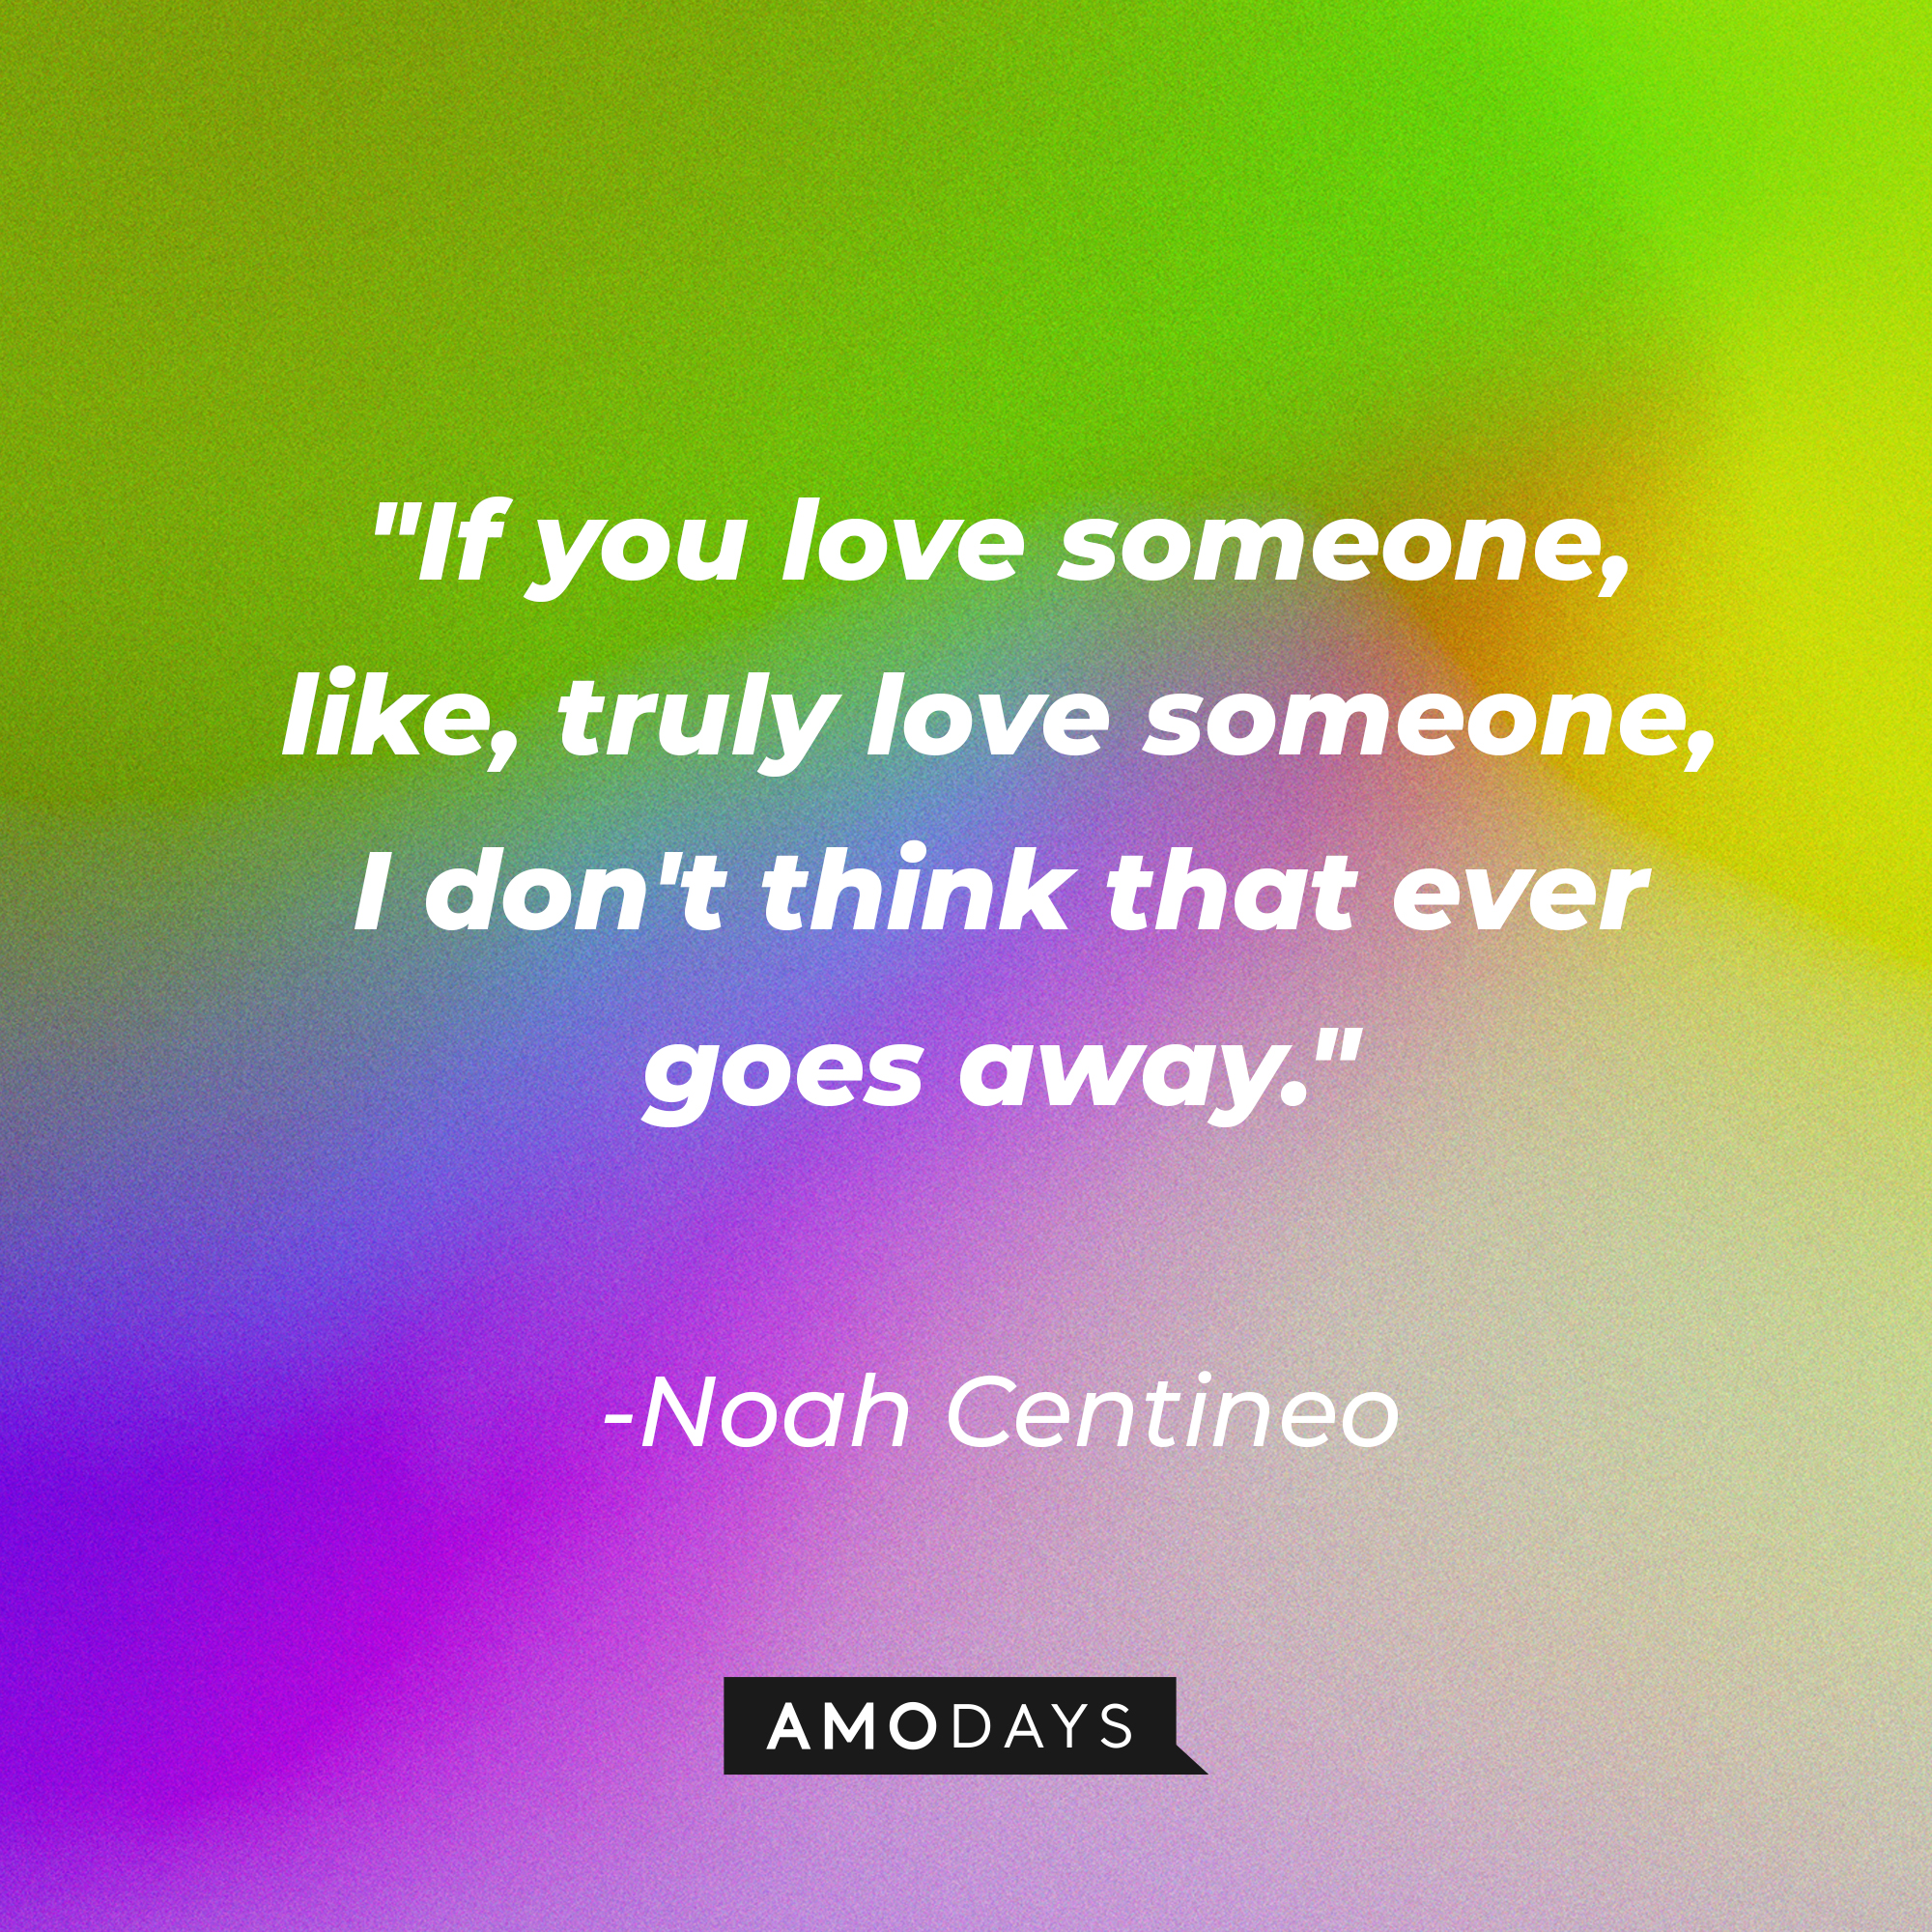 Noah Centineo's quote: "If you love someone, like, truly love someone, I don't think that ever goes away." | Image: AmoDays